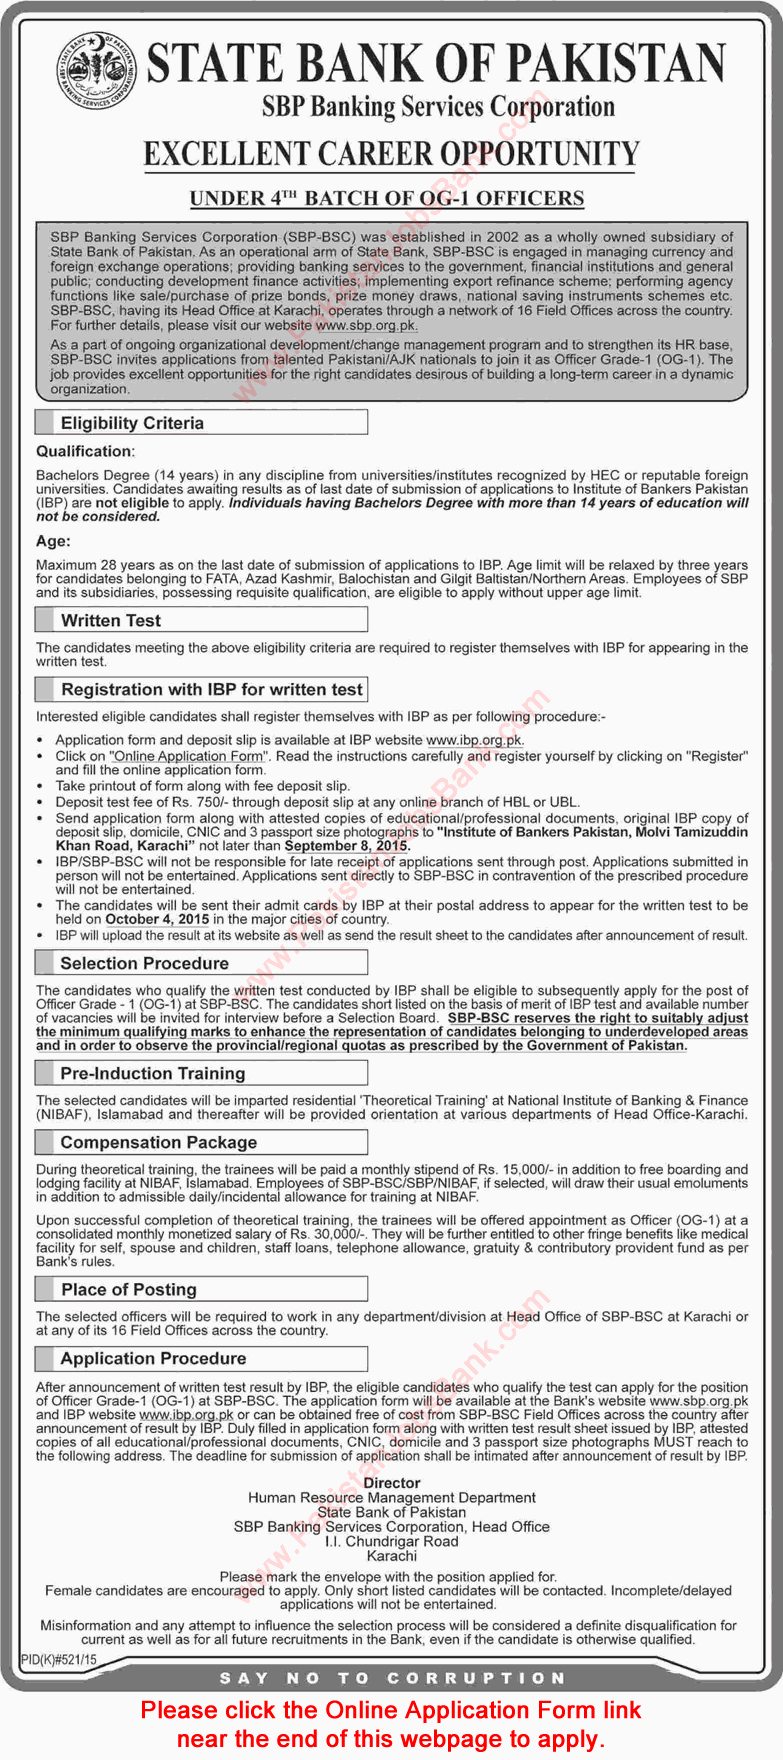 State Bank of Pakistan Jobs August 2015 OG-1 Officers Banking Services Corporation Online Application Form